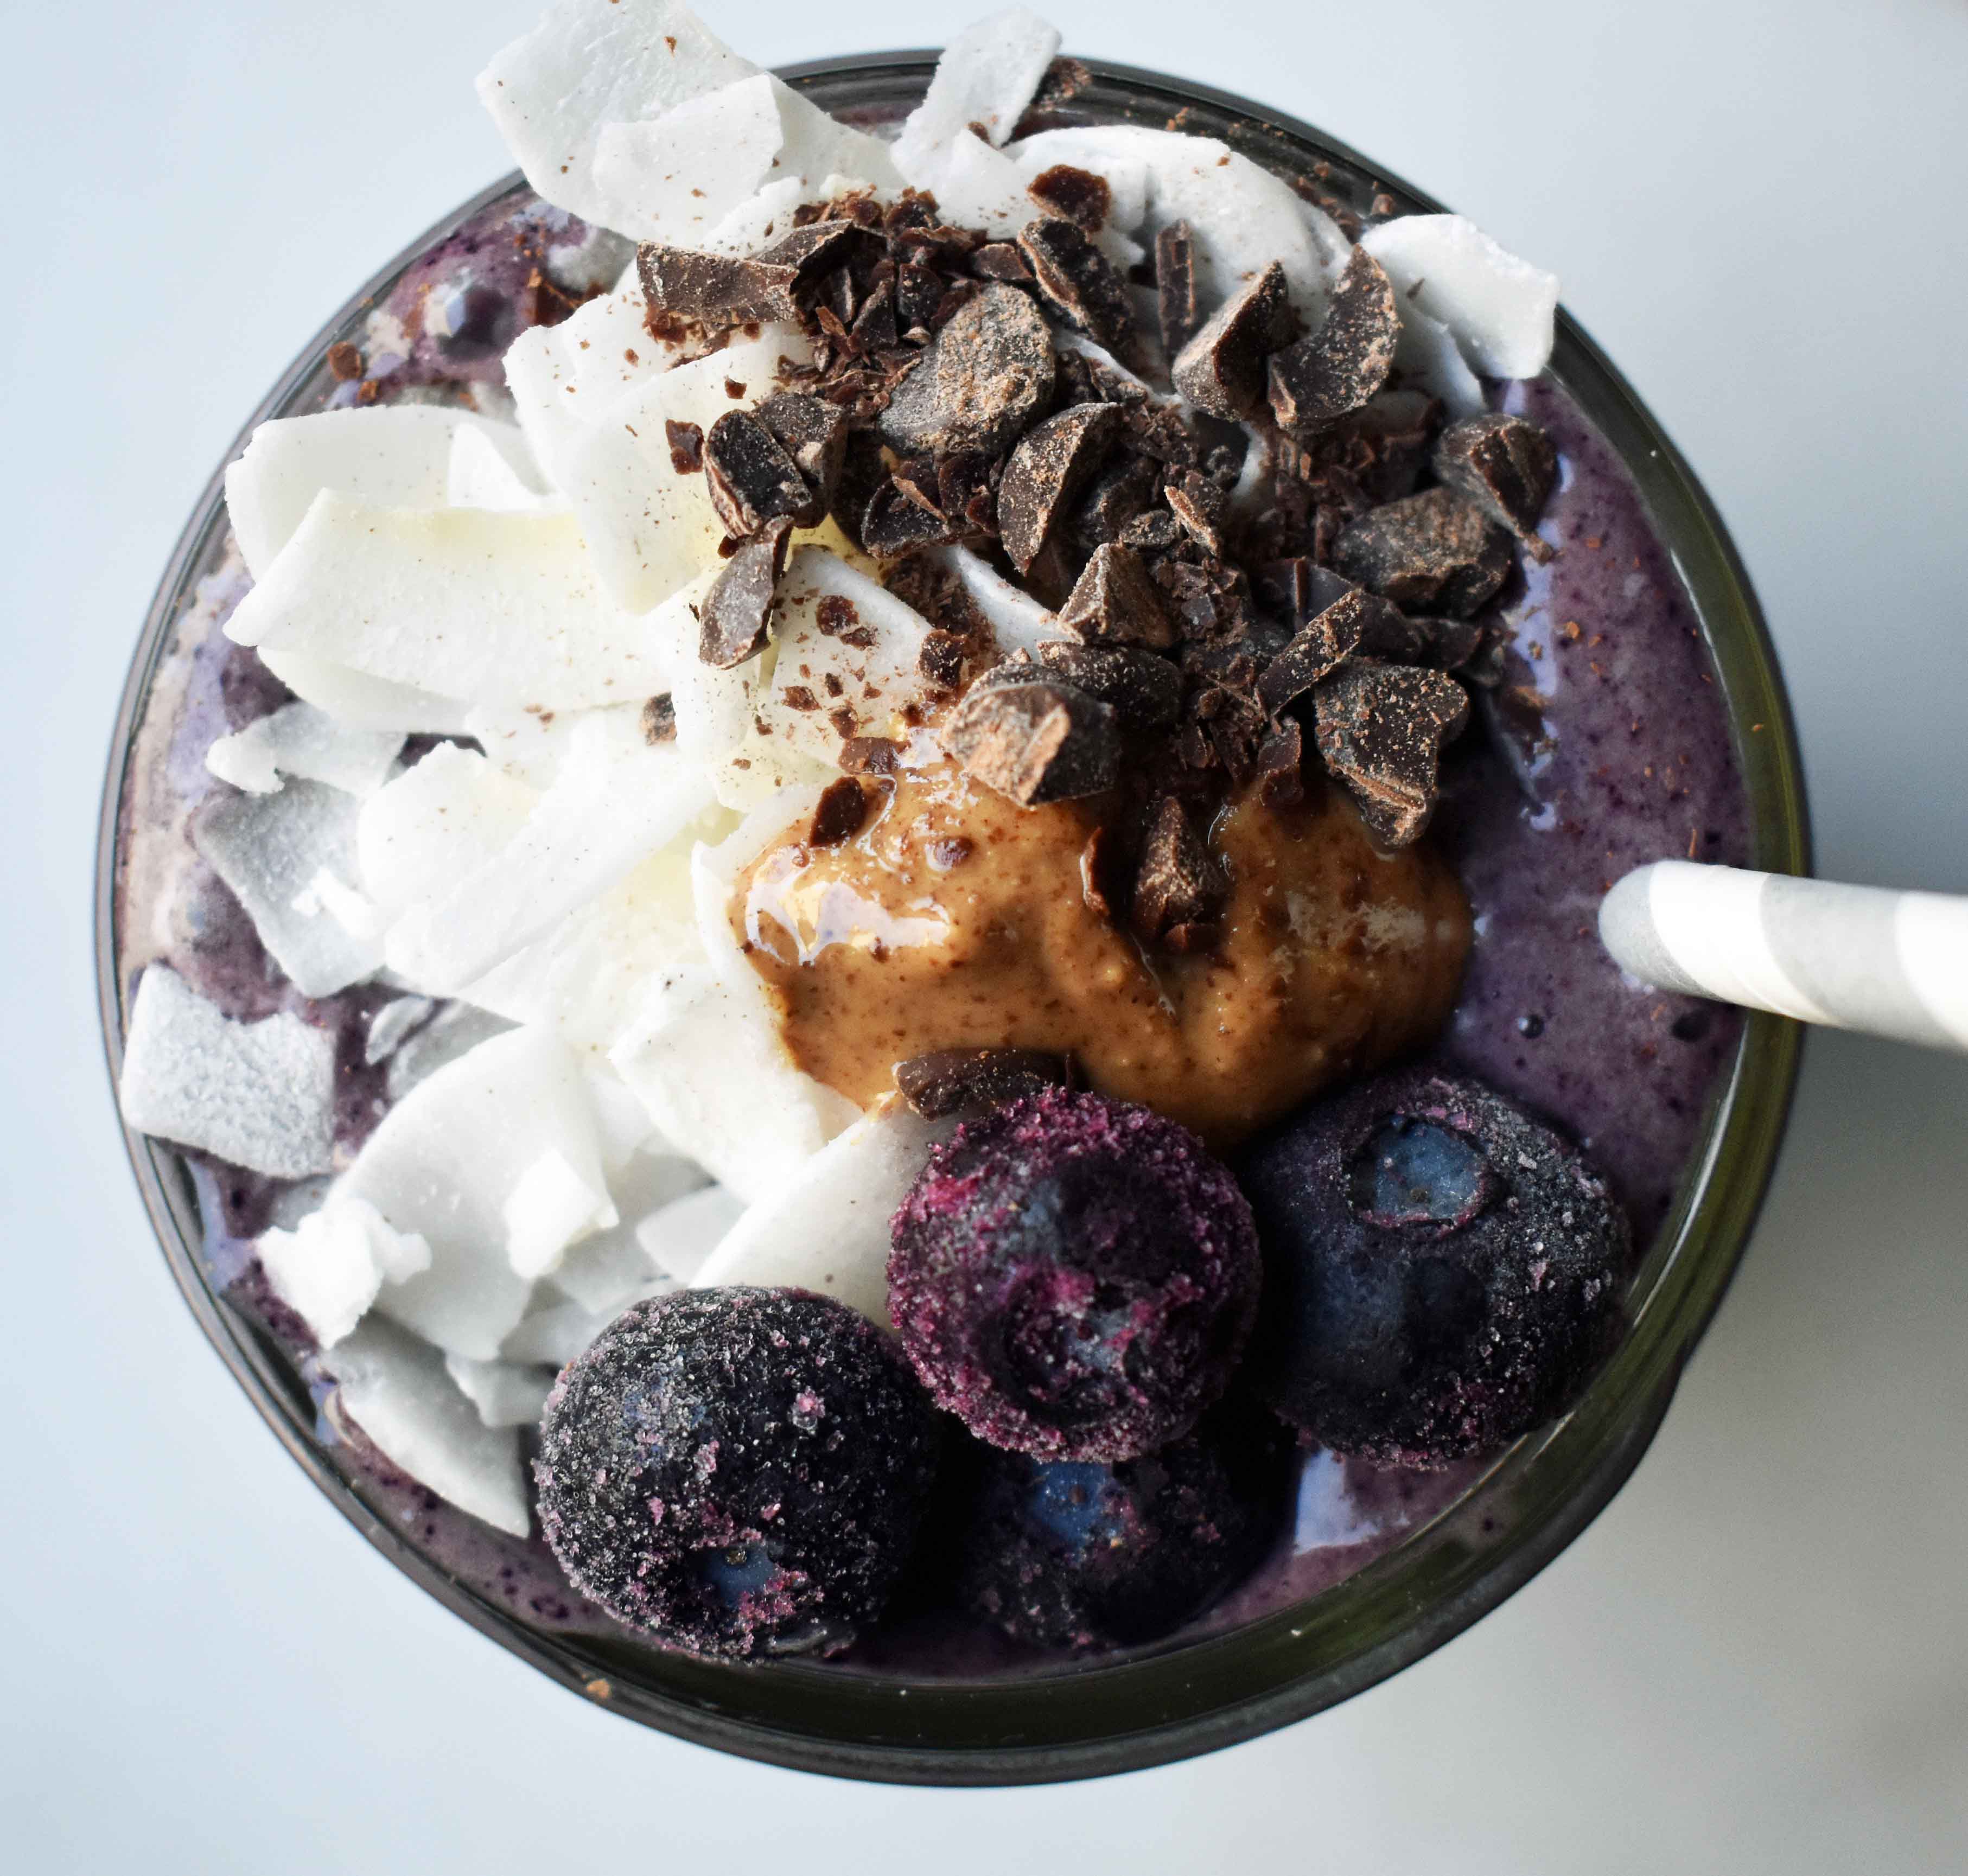 Easy Banana Blueberry Power Smoothie - Baker by Nature